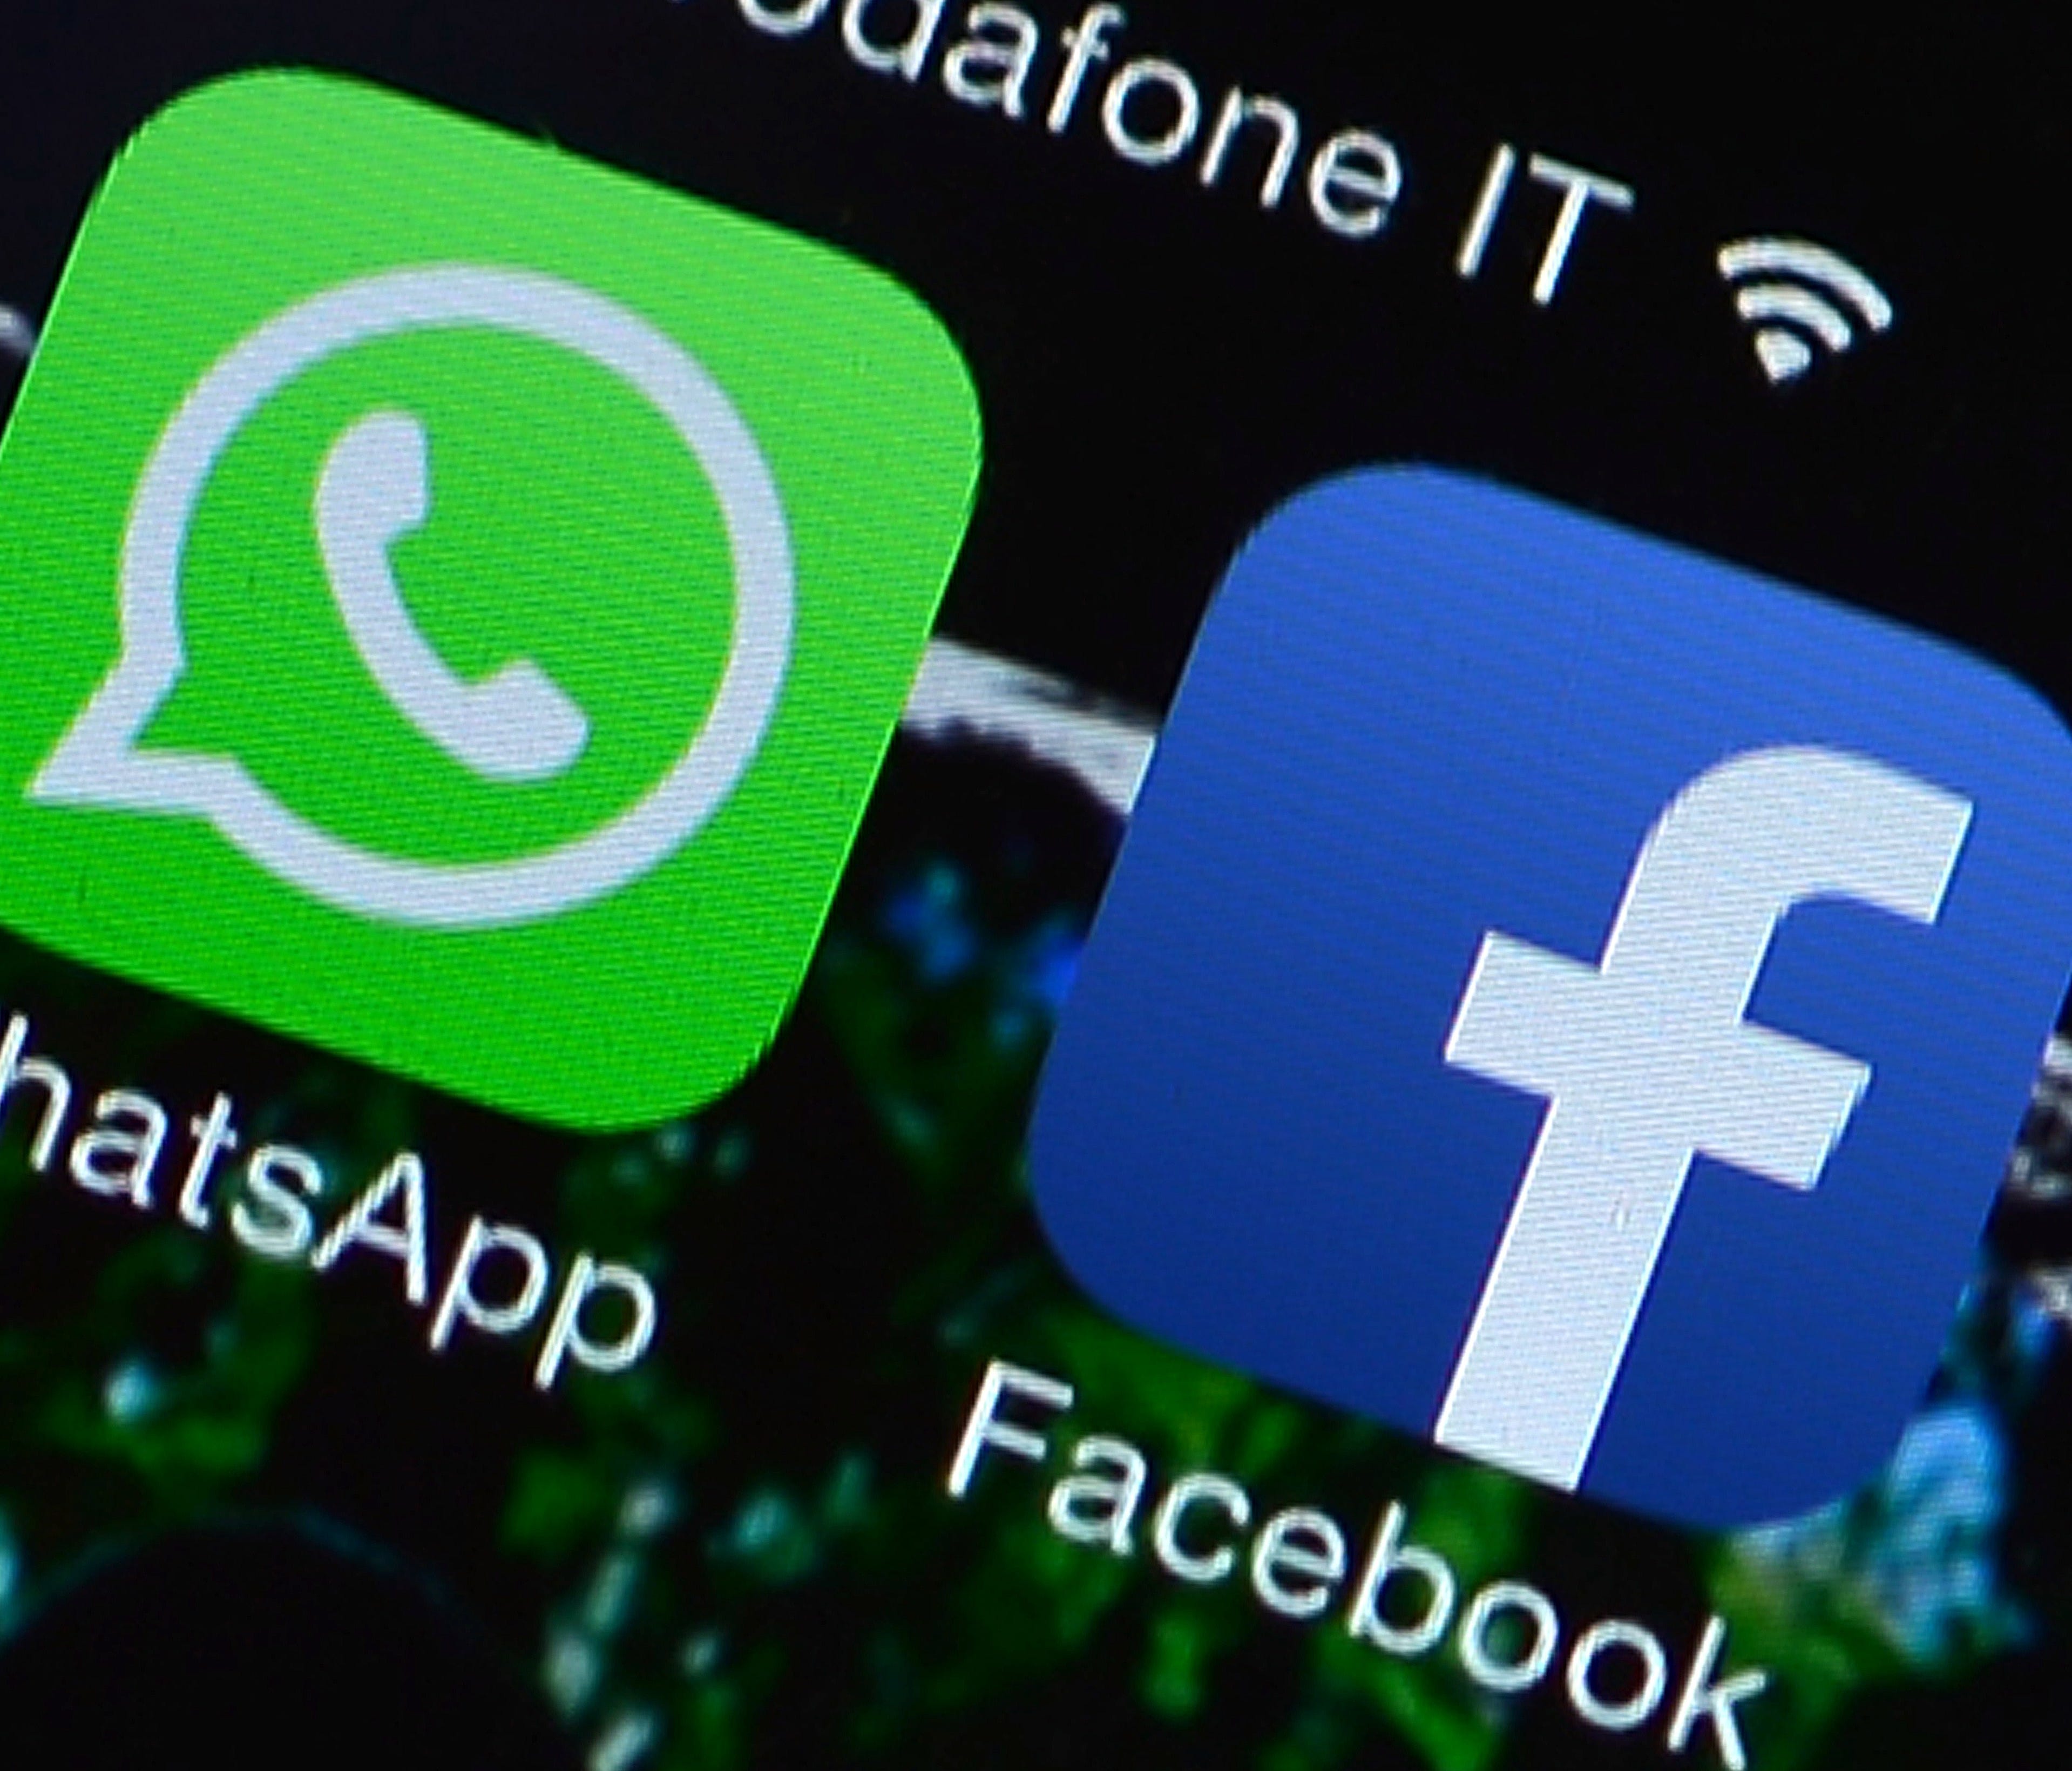 This file picture taken on Feb. 20, 2014 in Rome shows the Facebook and WhatsApp applications' icons displayed on a smartphone.